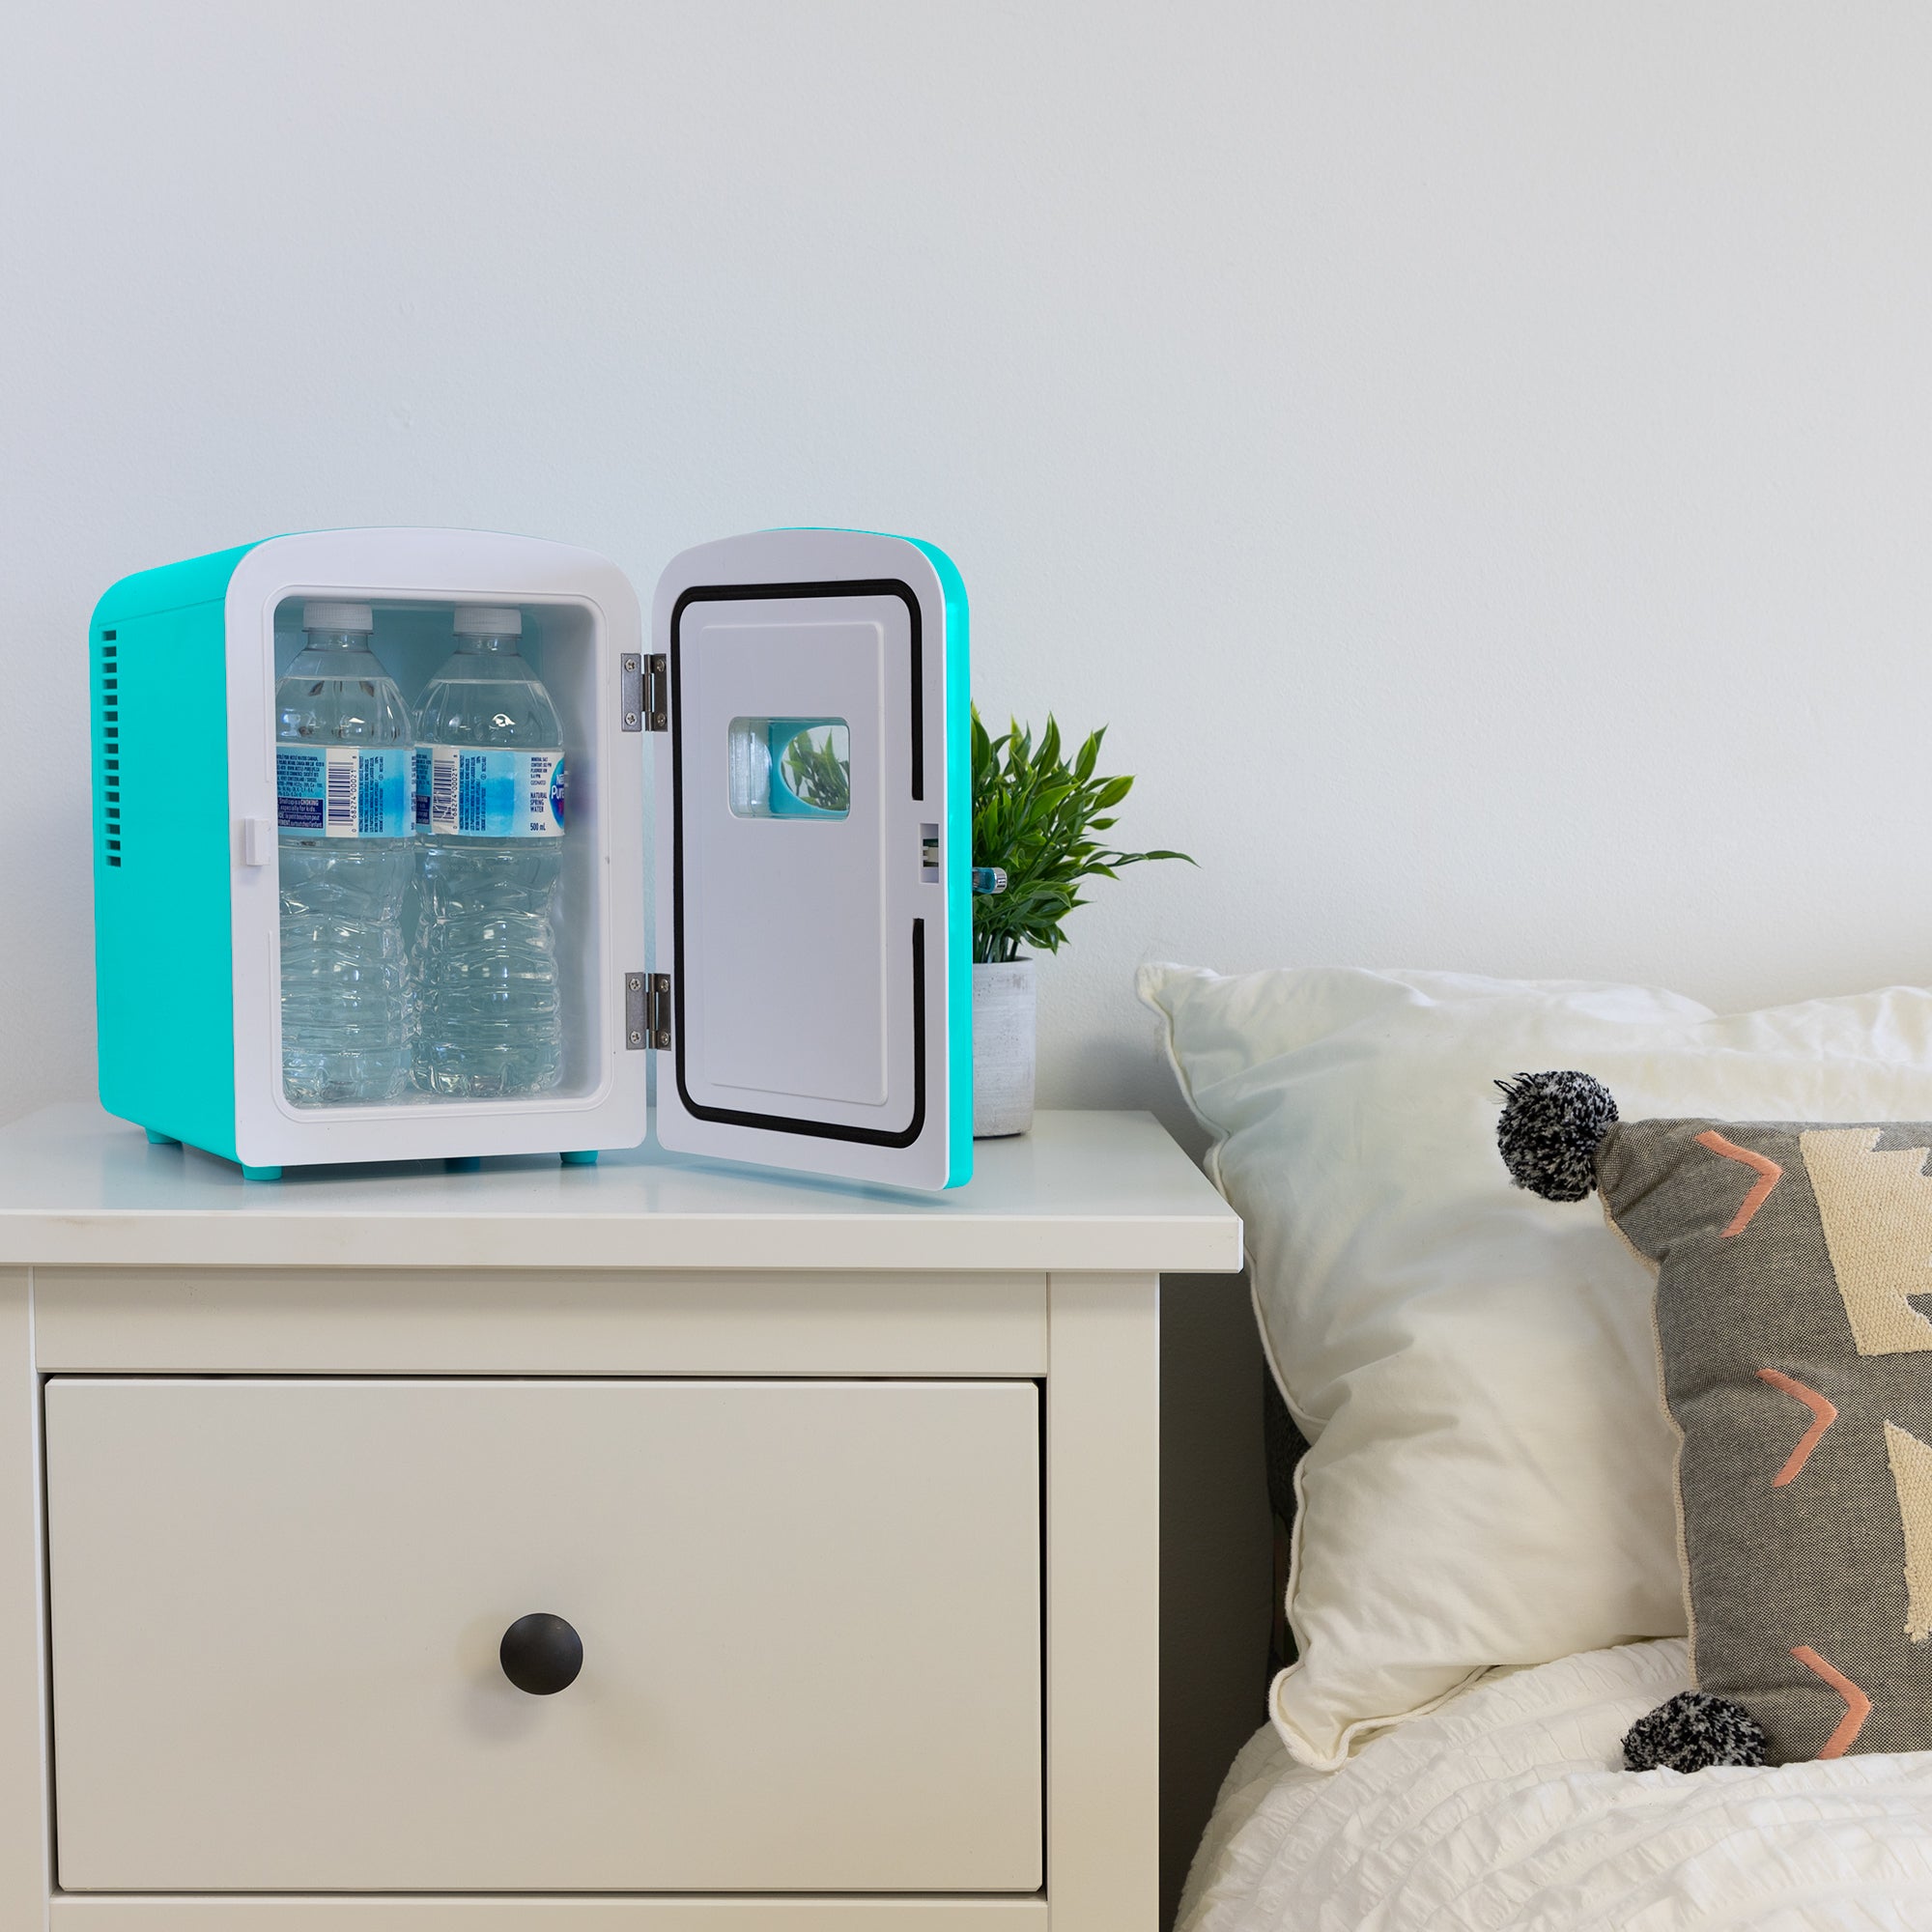 Lifestyle image of Koolatron retro 6 can mini fridge, open with 4 water bottles inside, with a plant in a white pot on its right, on a white bedside table beside a bed with white linens